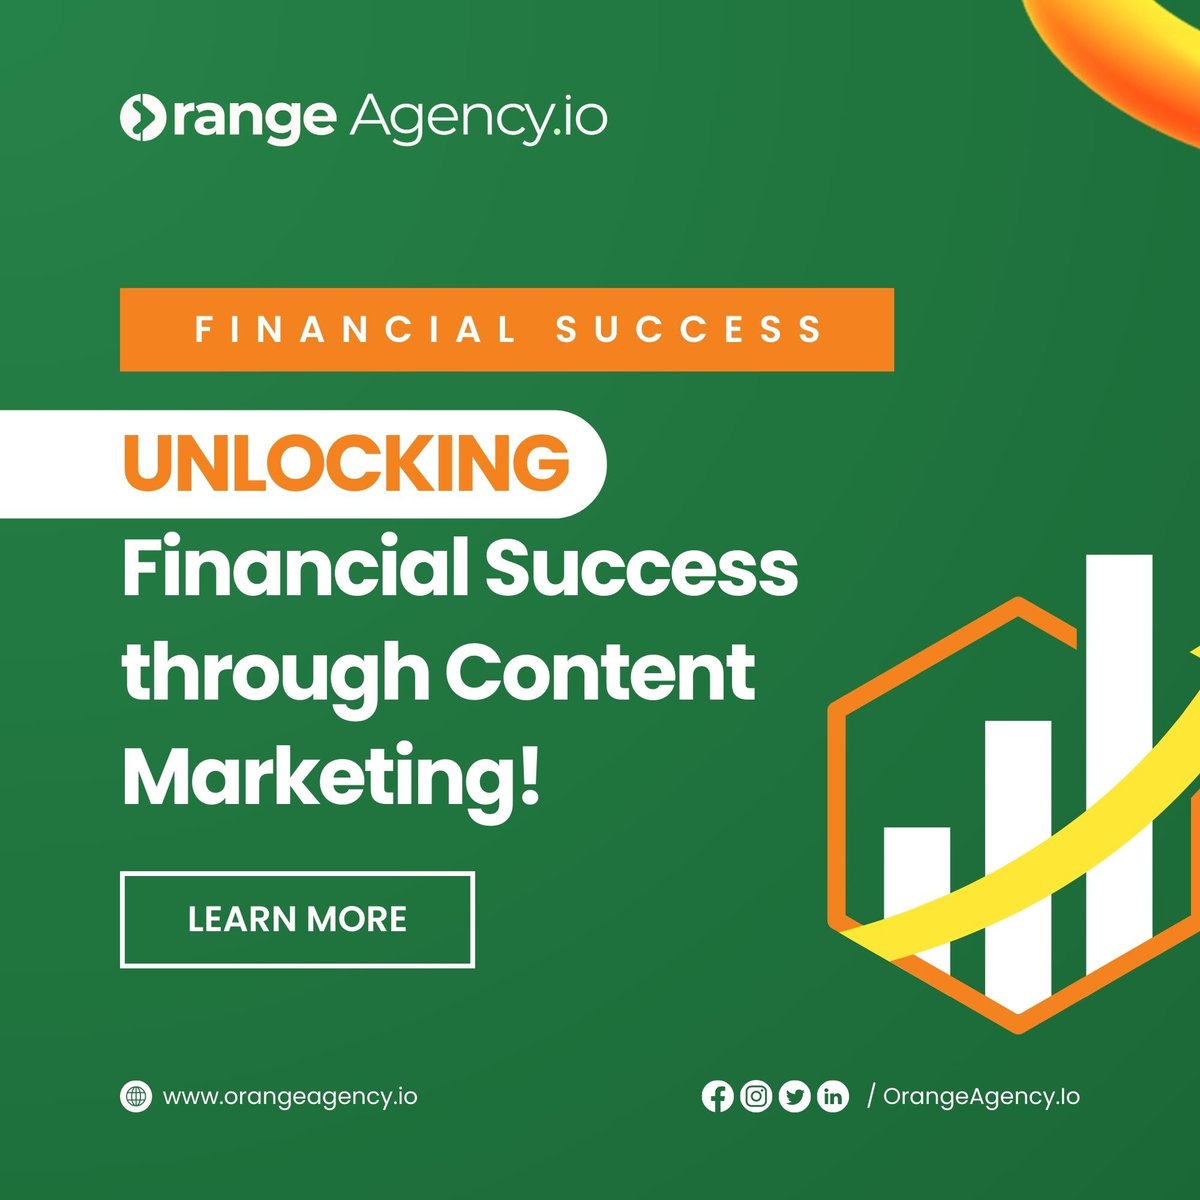 Unlocking Financial Success through Content Marketing!

Elevating Accountancy! tinyurl.com/2p97xyv2

#OrangeAgency #AccountingExperts #FinancialSuccess #ExpertAdvice
#OnlineVisibility #ClientAttraction #FinancialConsulting #AccountingMastery #niger #Tesla #Discord #Titanic